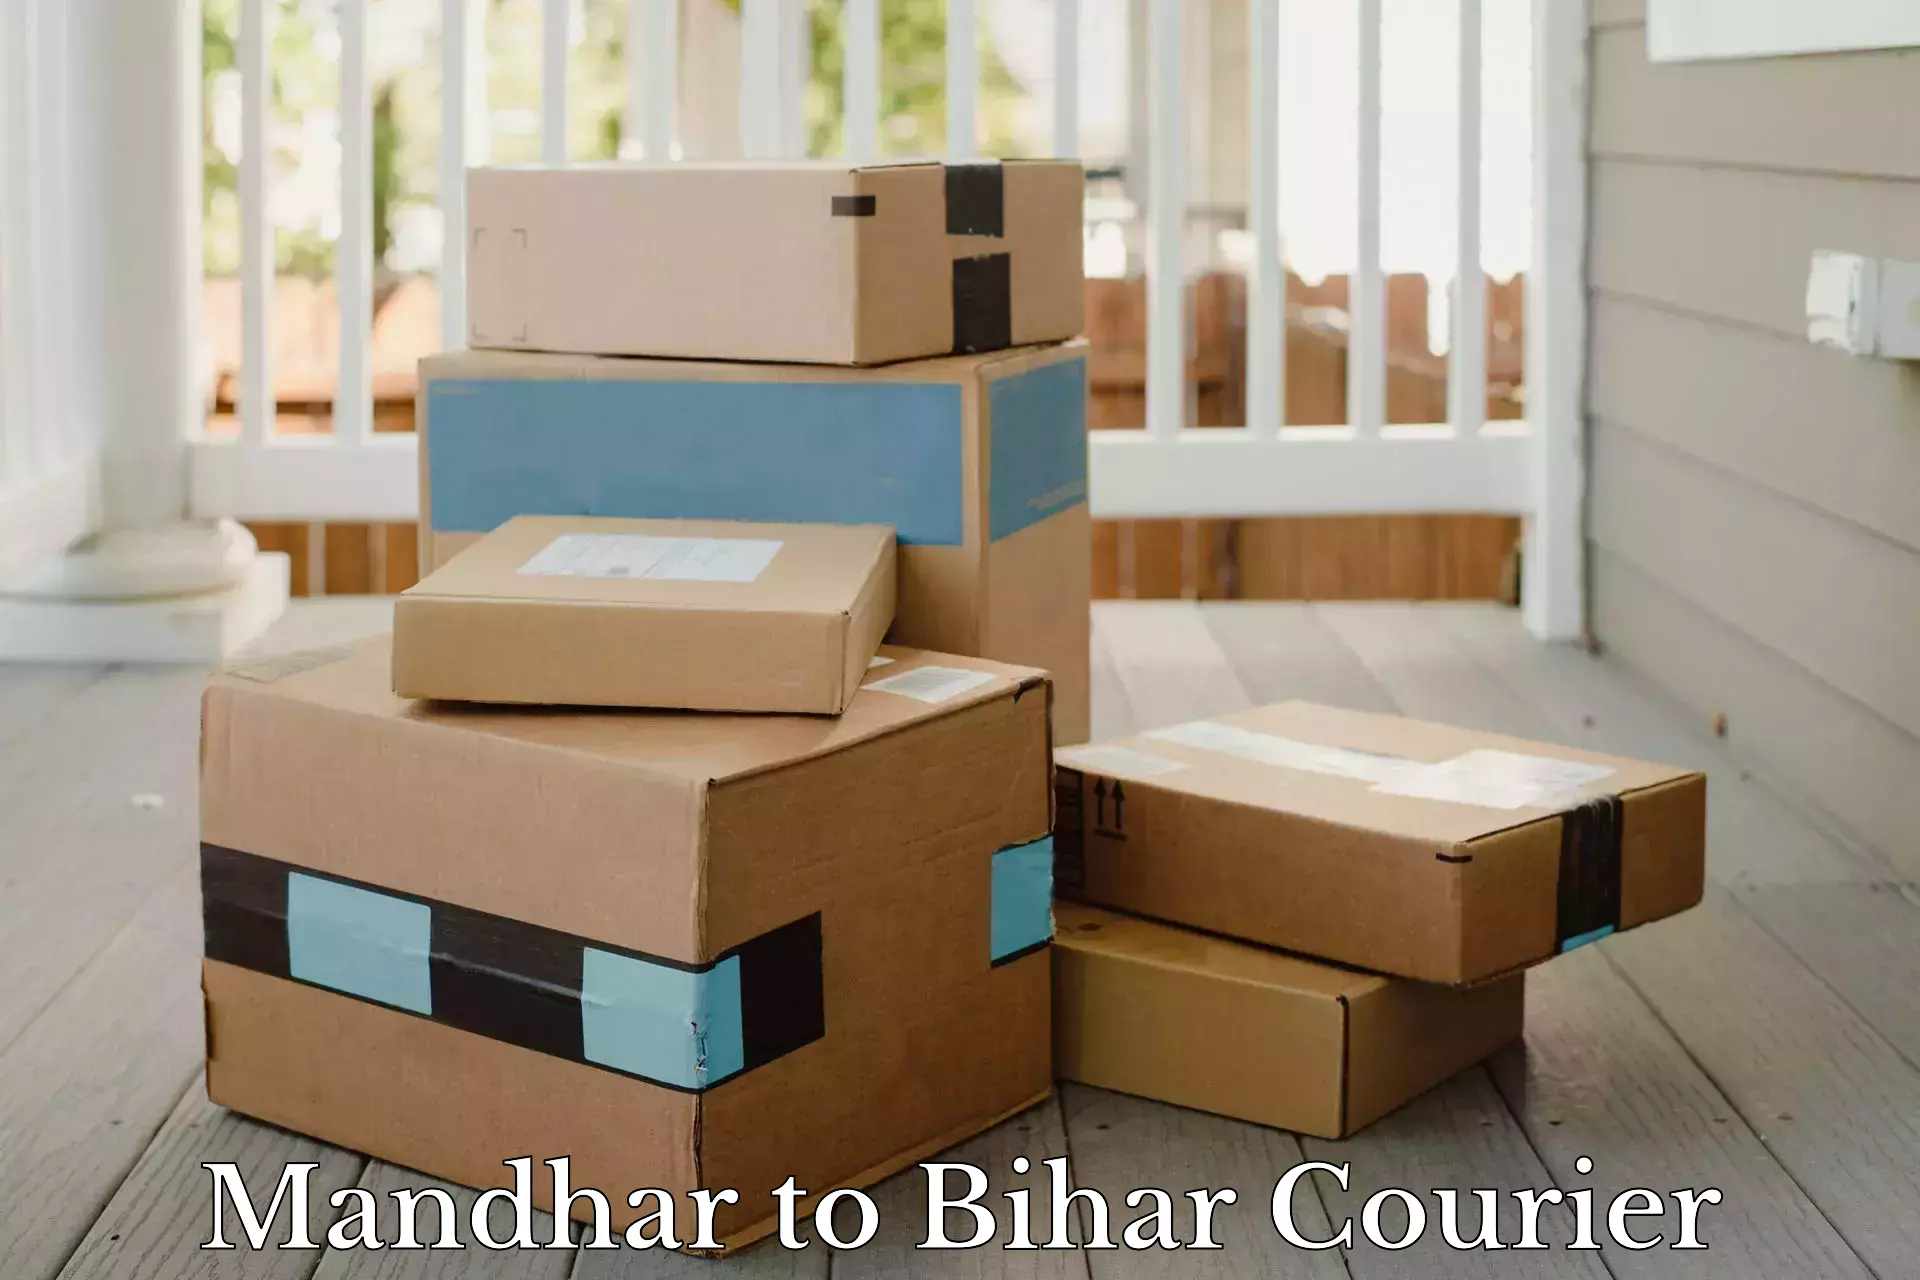 Sustainable shipping practices in Mandhar to Bihar